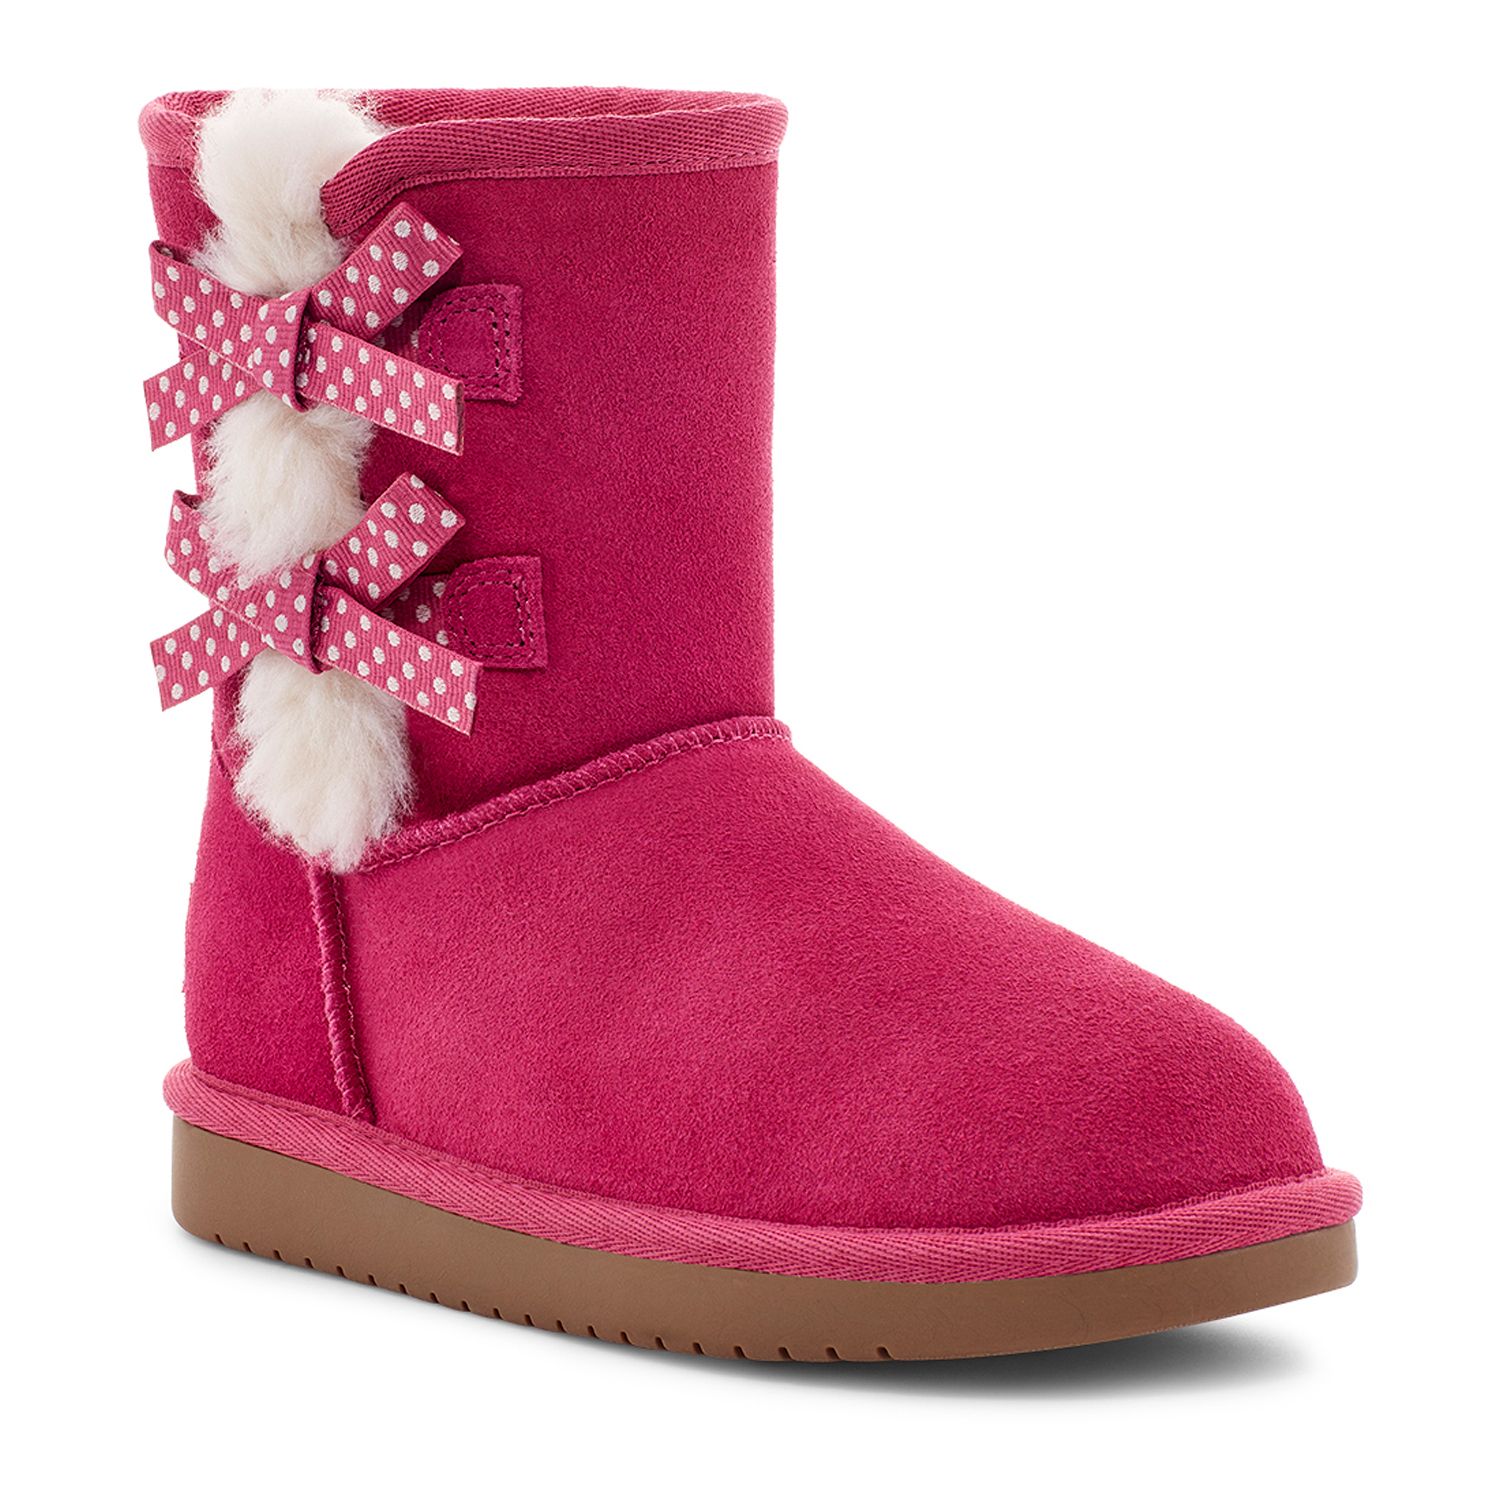 victoria boots by ugg